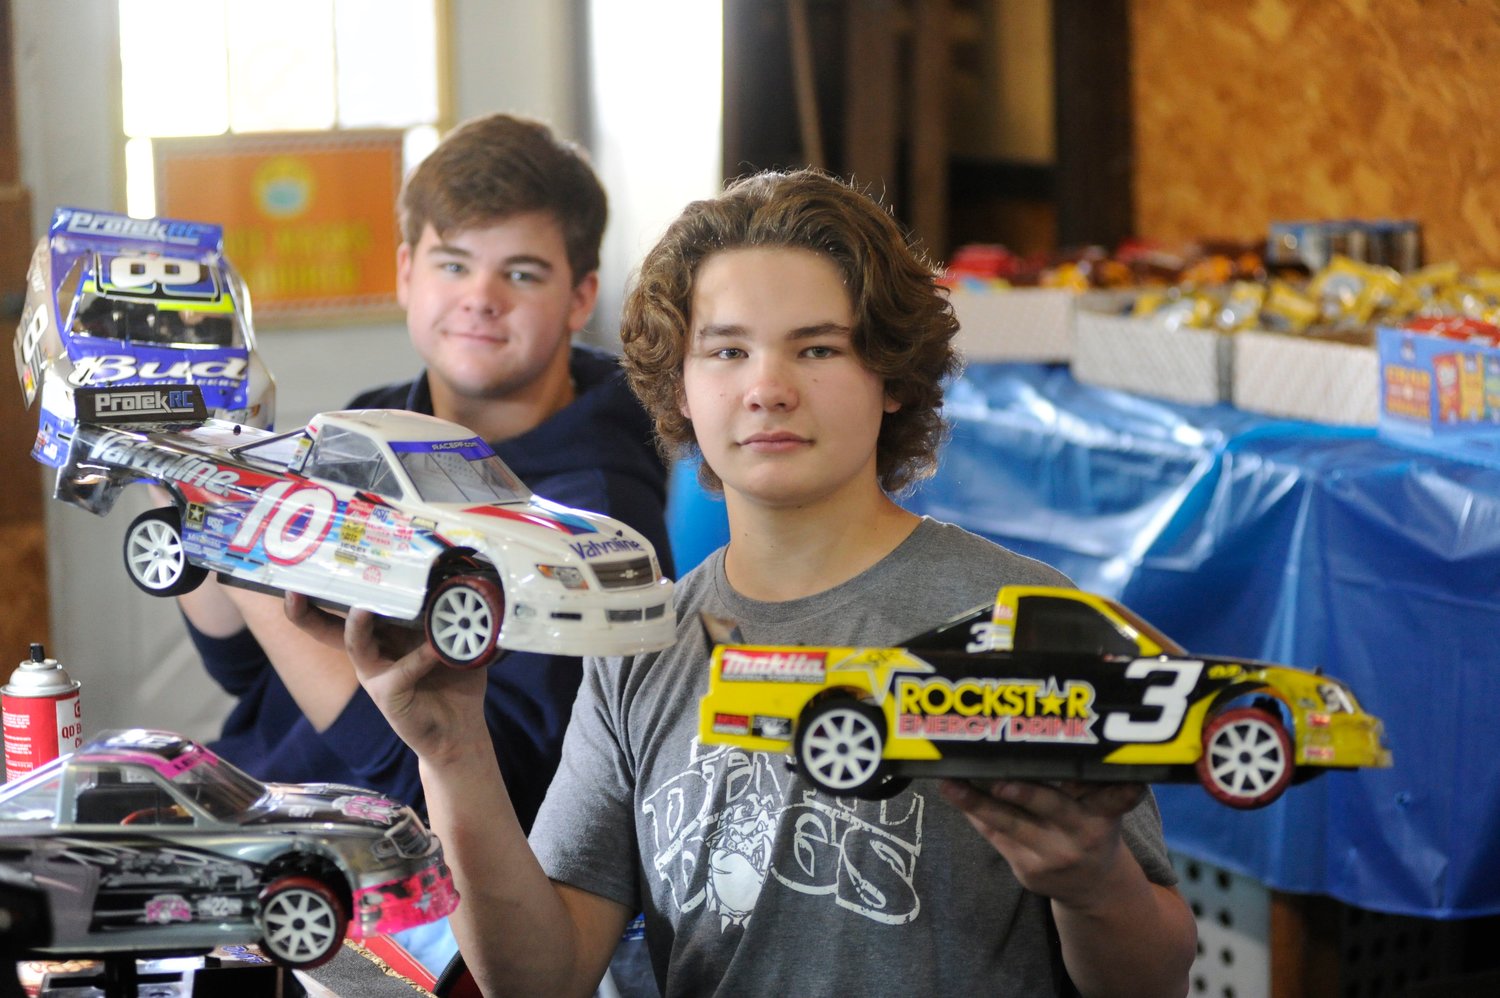 Racing brothers. Dylan LeBranc, 15, and his 17-year-old brother, Dayton, of Greenville, NY took home several trophies. Dylan placed third in Tec Truck and first in Breakout, while Dayton posted fourth in Tec Truck and second in Breakout.